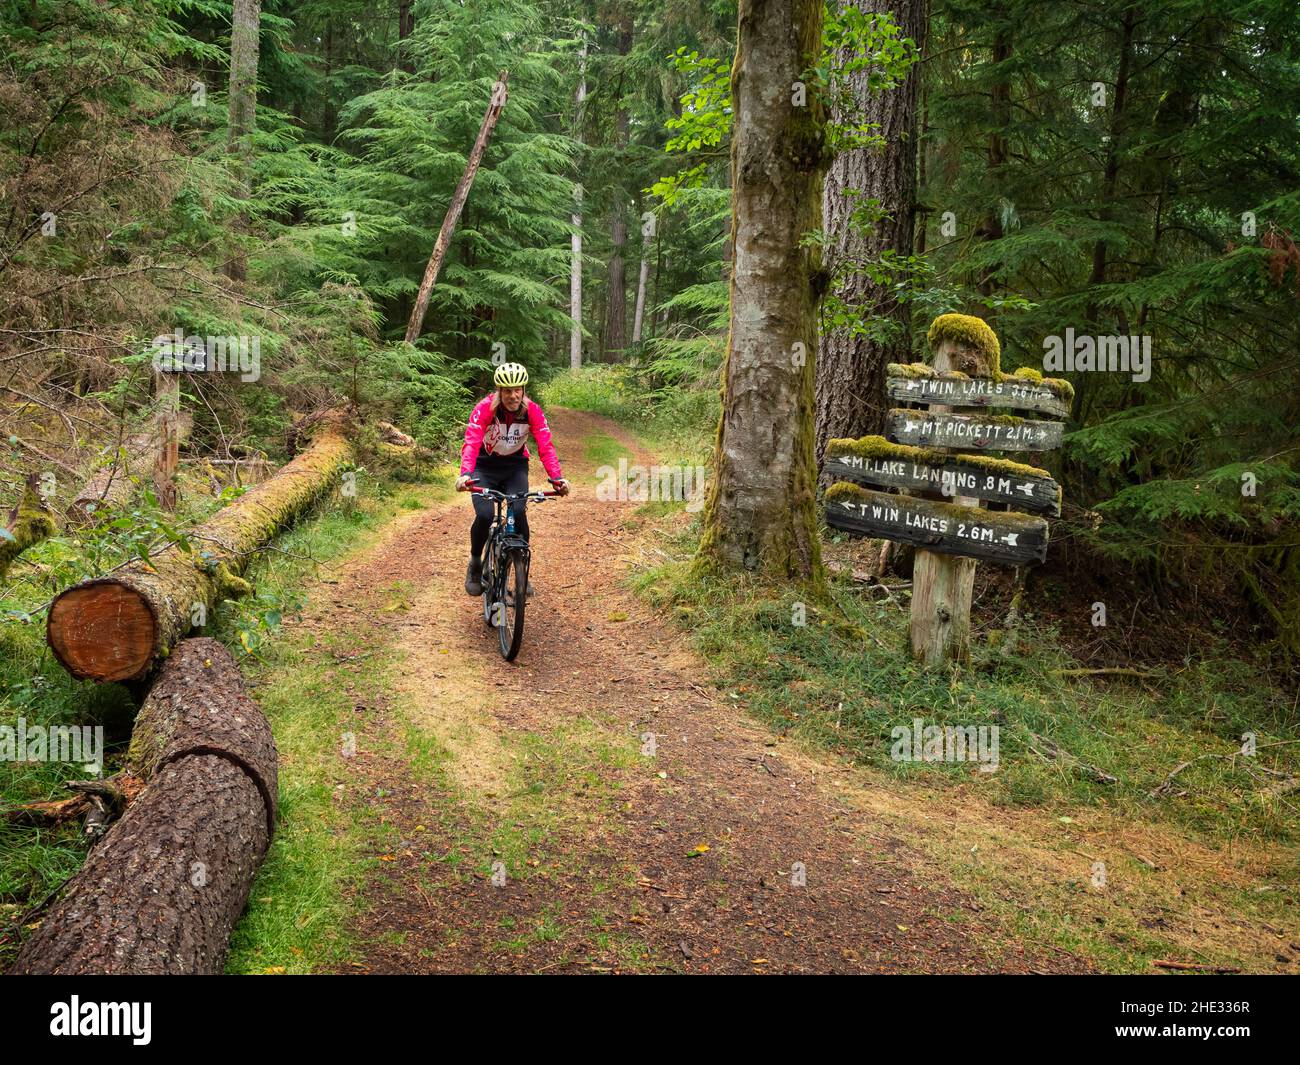 WA21033-00...WASHINGTON - Riding the old forest roads turned into hiking and biking trails in Moran State Park on Orcas Island. Stock Photo